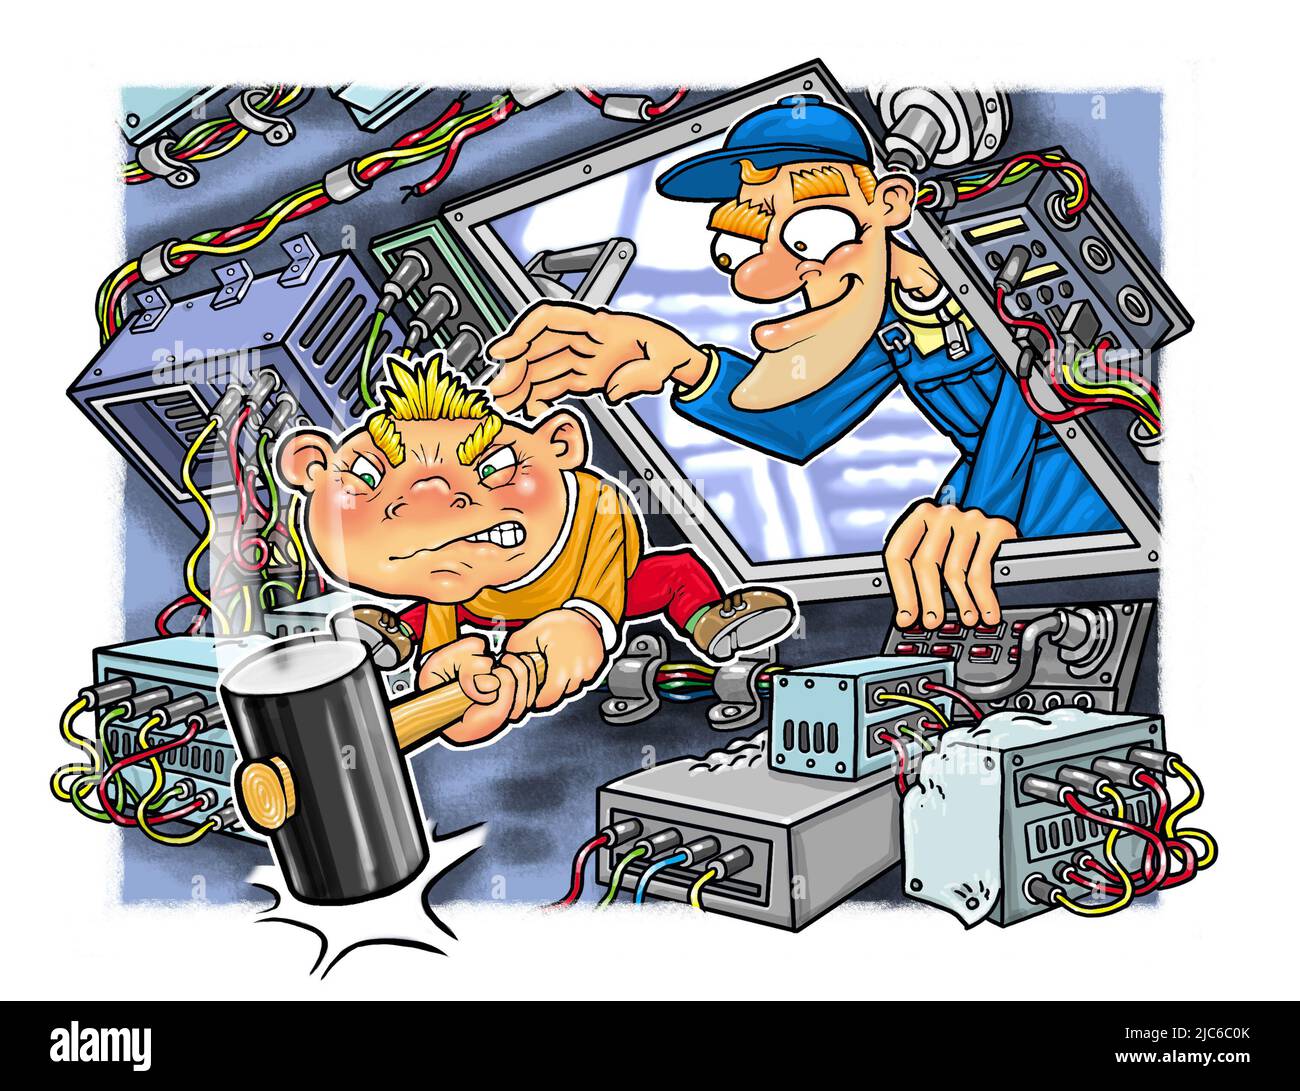 Funny cartoon gremlin inside computer/machinery smashing it up with hammer, repair man pulling him out illustrating concept of gremlins in the system Stock Photo